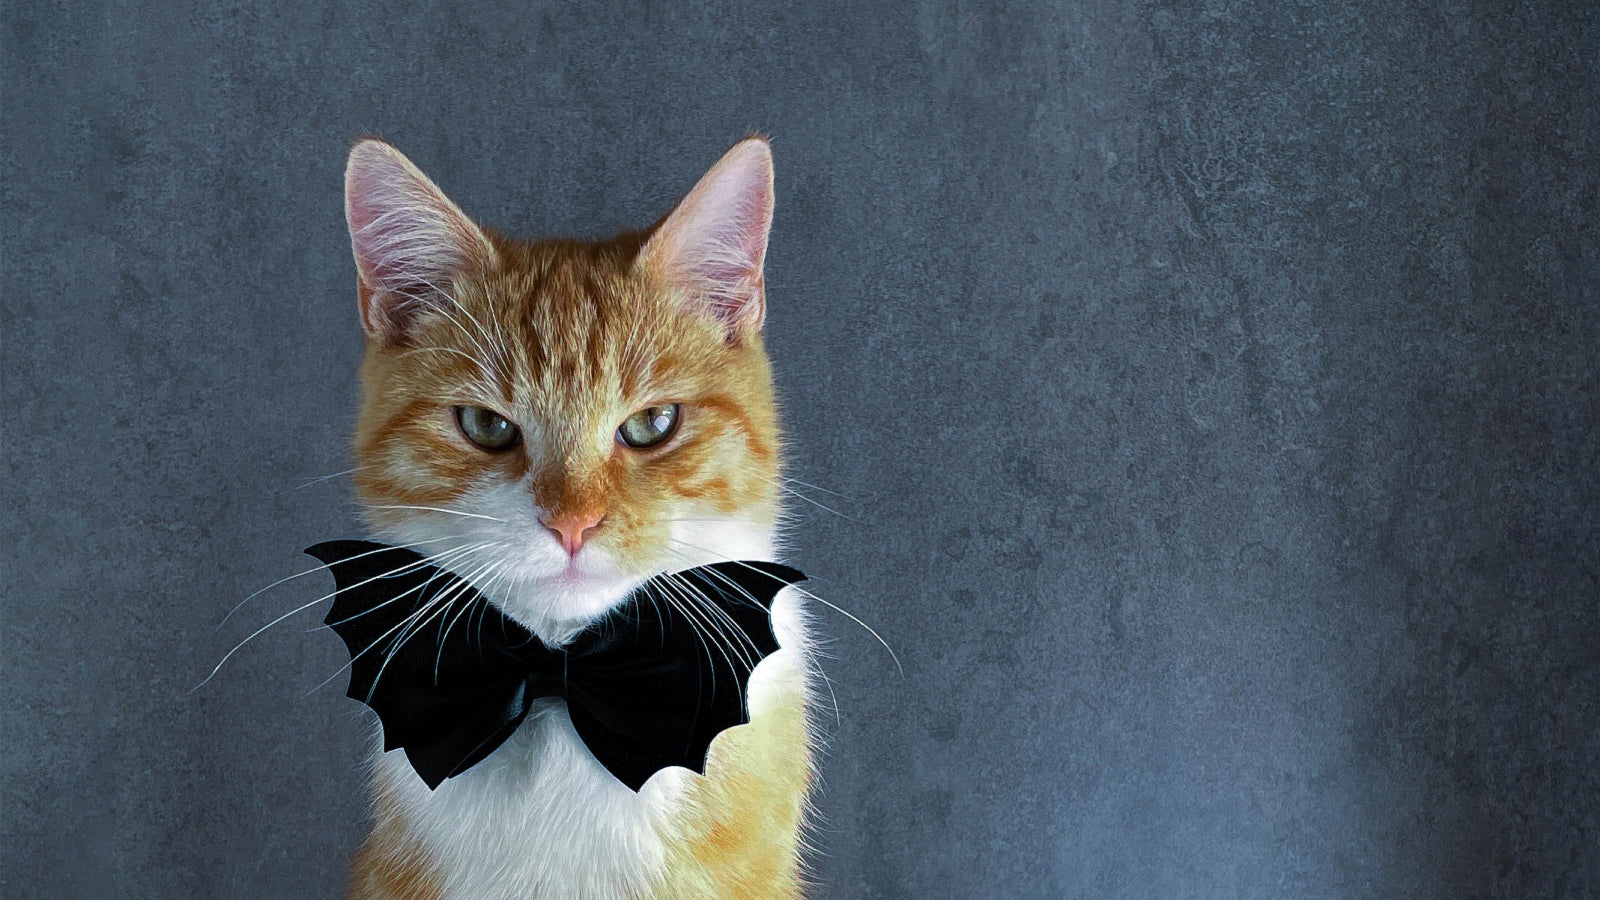 A white and tan cat with a black bat bowtie on for a catman costume